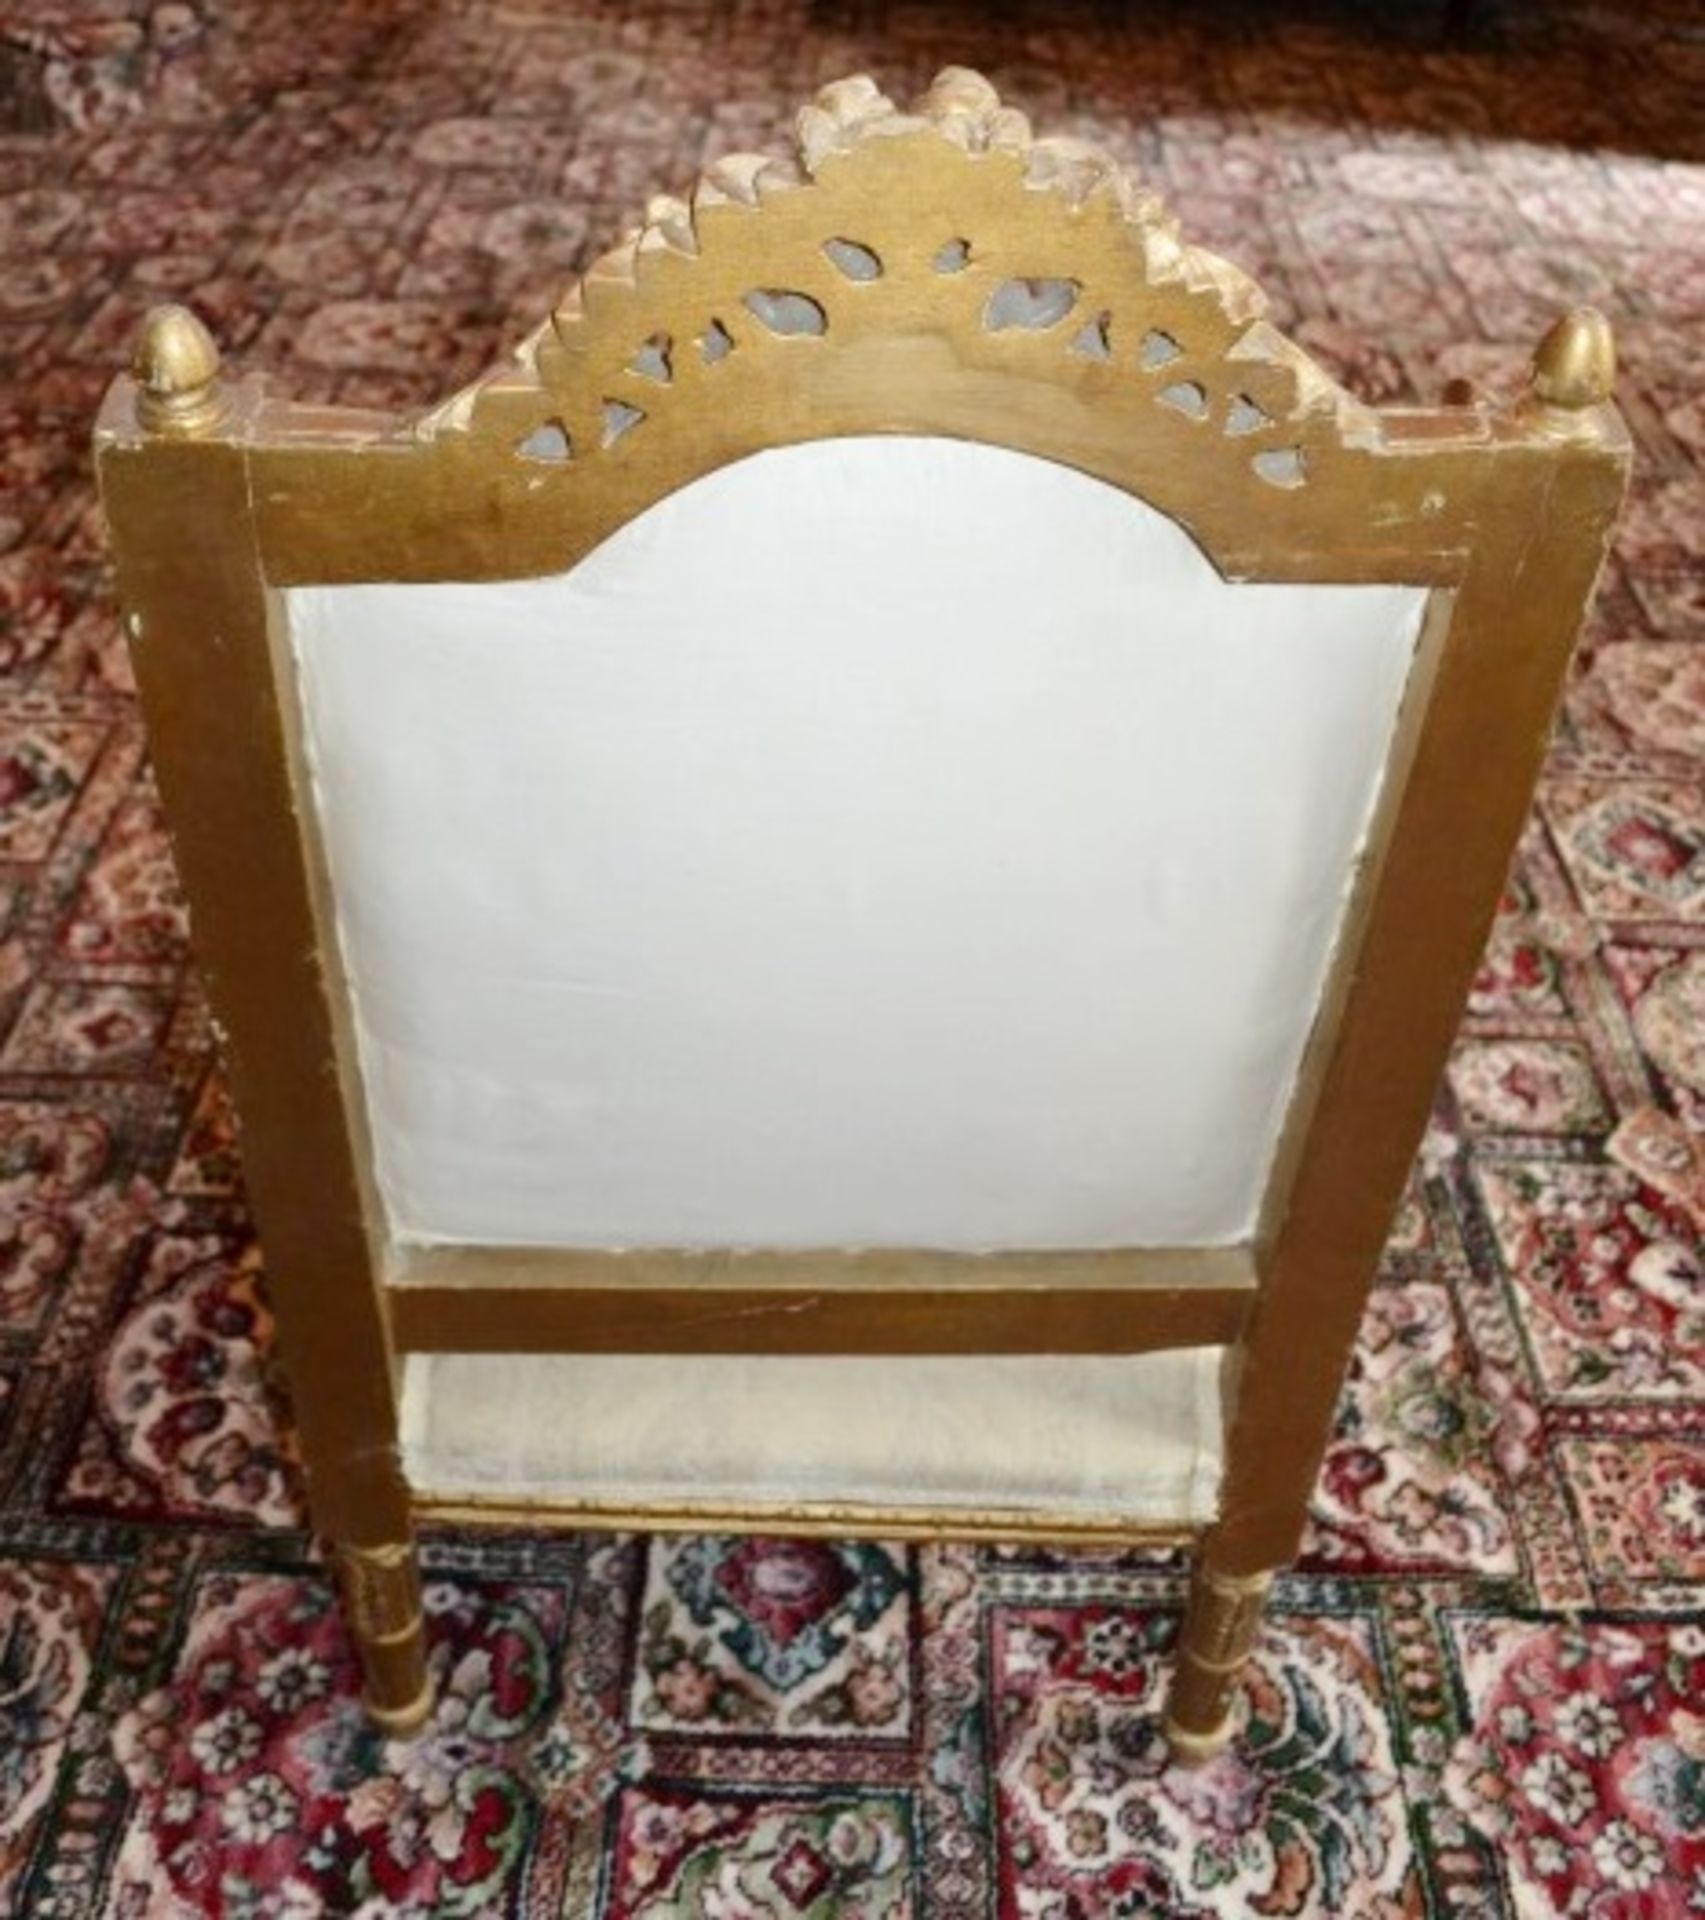 1 x Period Gold Gilt Armchair - Upholstered In A Rich Cream Fabric - From A Grade II Listed Hall - Image 3 of 9